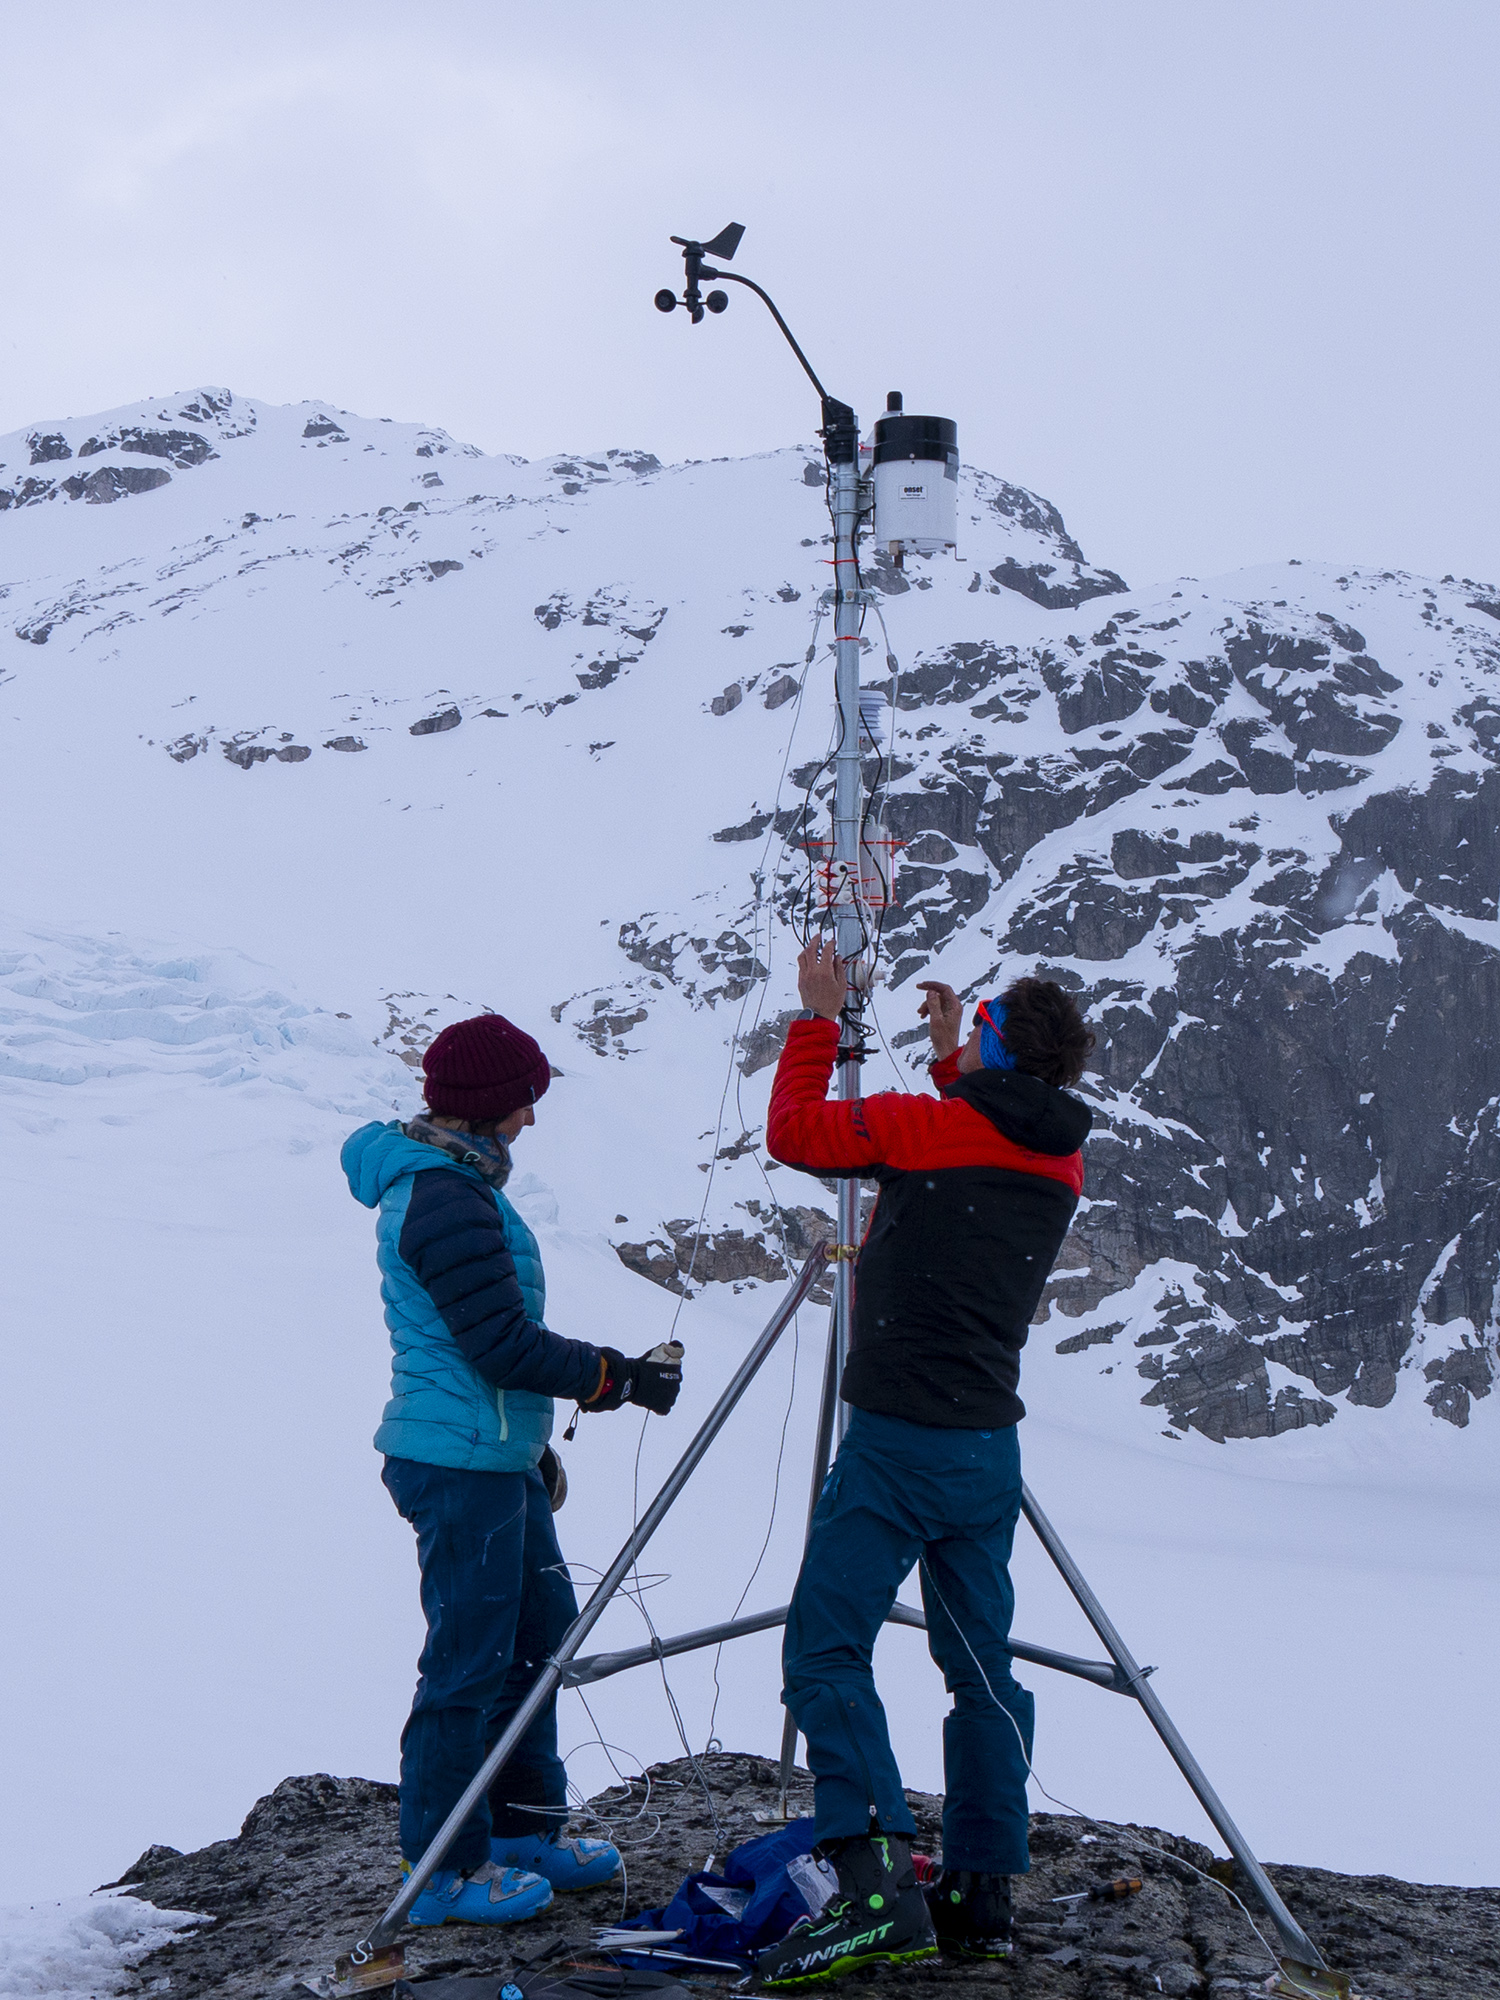 A group of researchers wants to help communities living close to melting glaciers. Photo shows scientists mounting equipment.